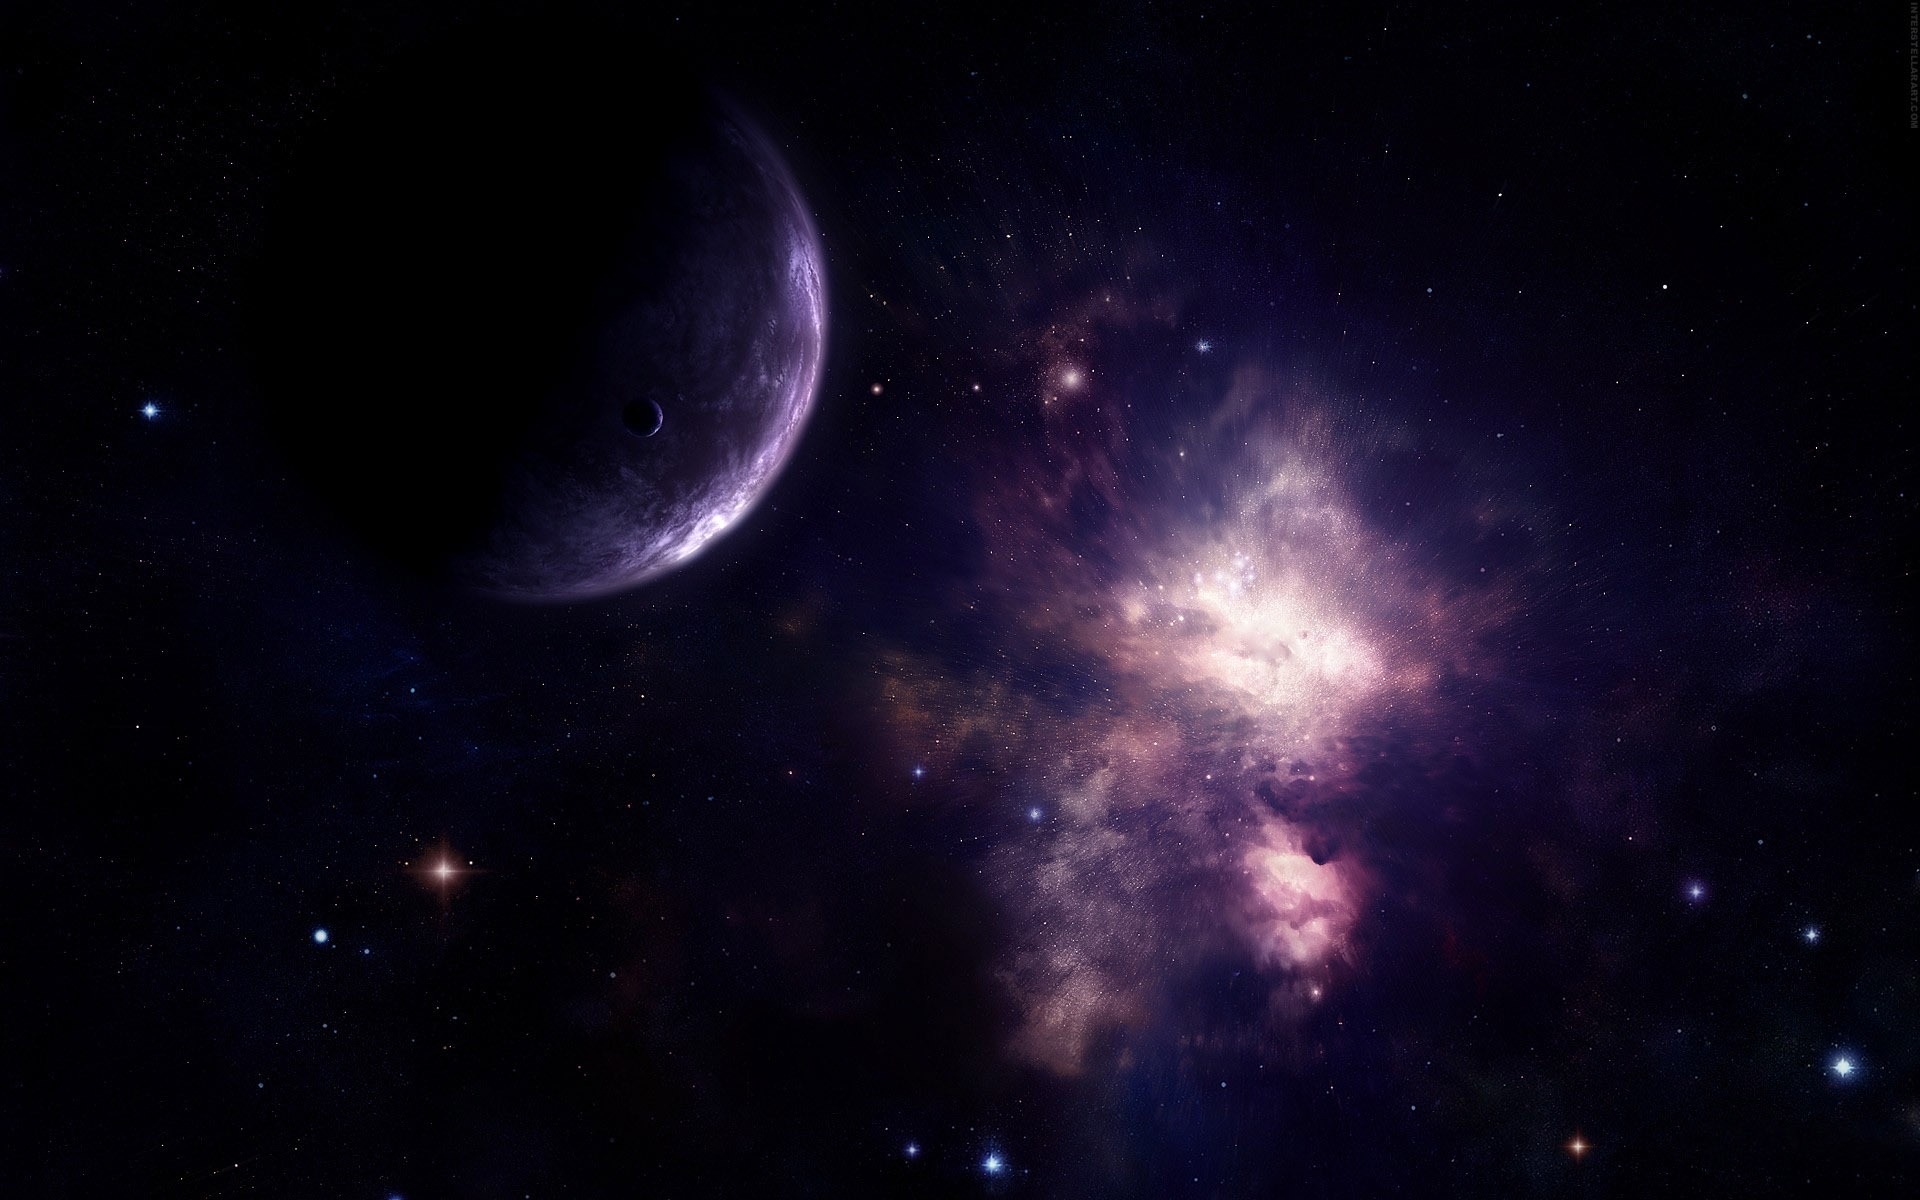 Star Earth HD Wallpapers #7 - 1920x1200